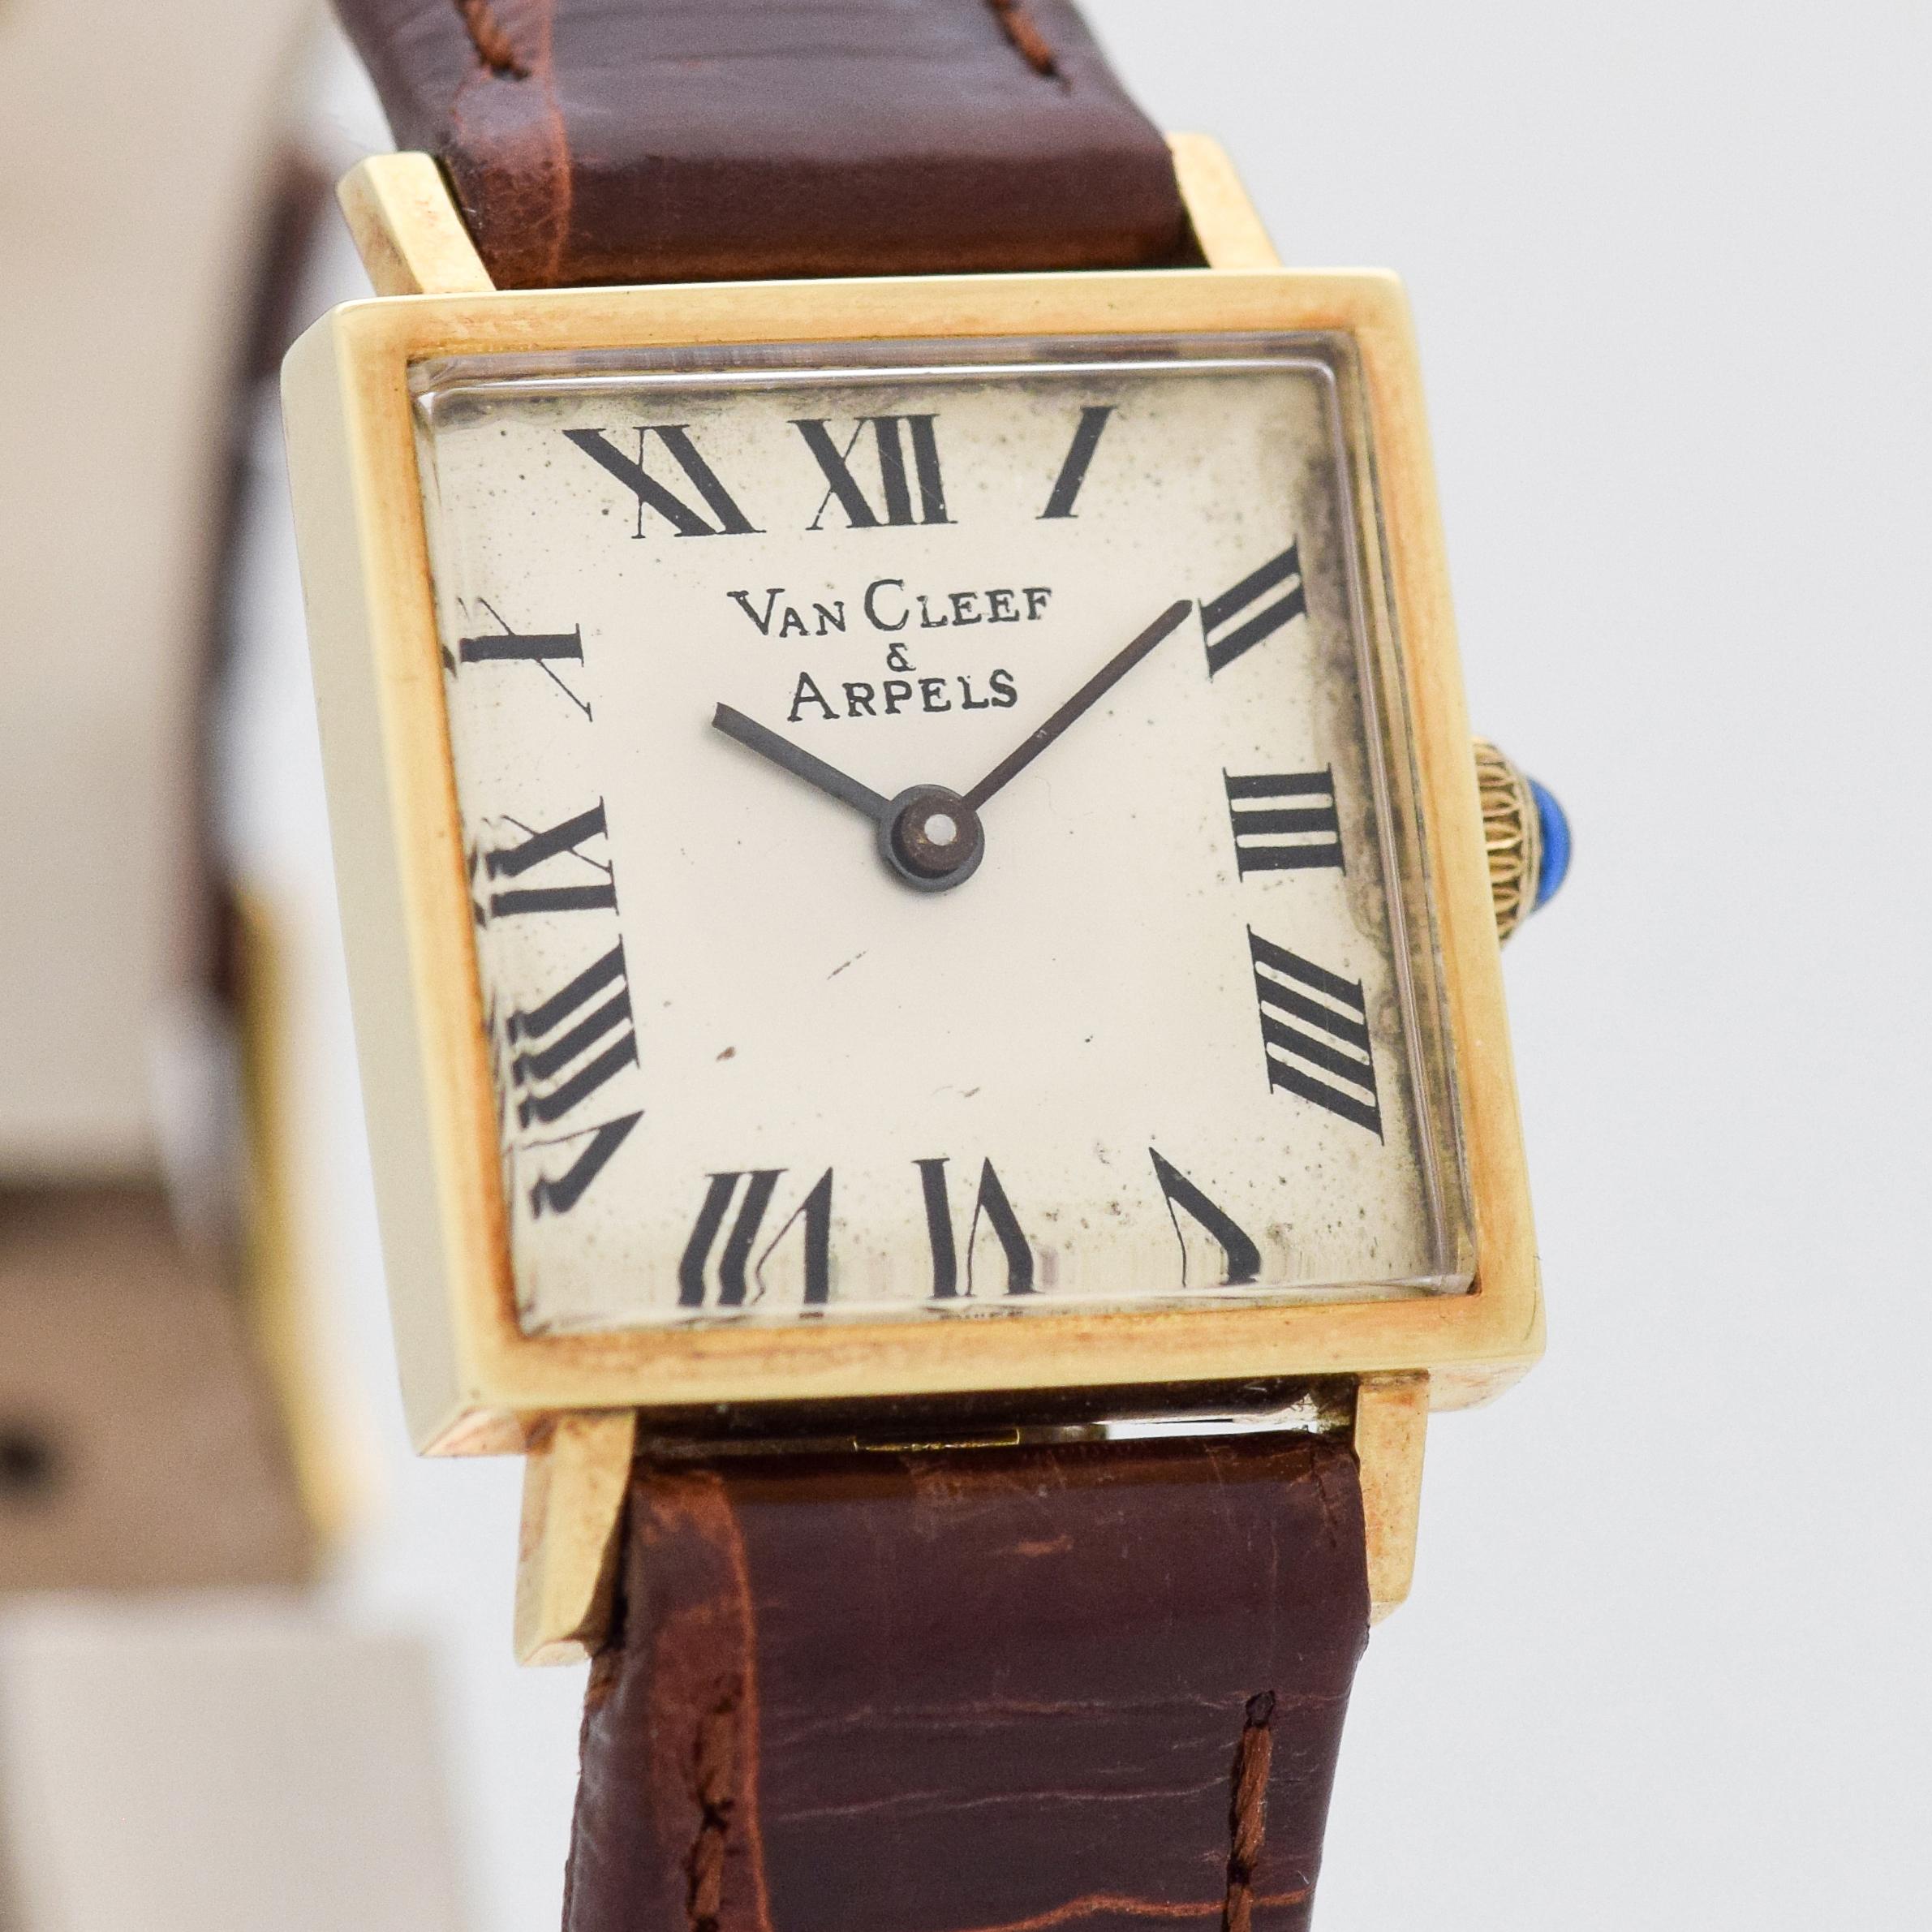 1990's Van Cleef & Arpels Ladies 14k Yellow Gold Square watch with Original Silver Dial with Black Painted Roman Numerals.  20mm x 28mm lug to lug (0.79 in. x 1.1 in.) - 17 jewel, manual caliber ETA movement. Triple Signed. Comes with Original Box.